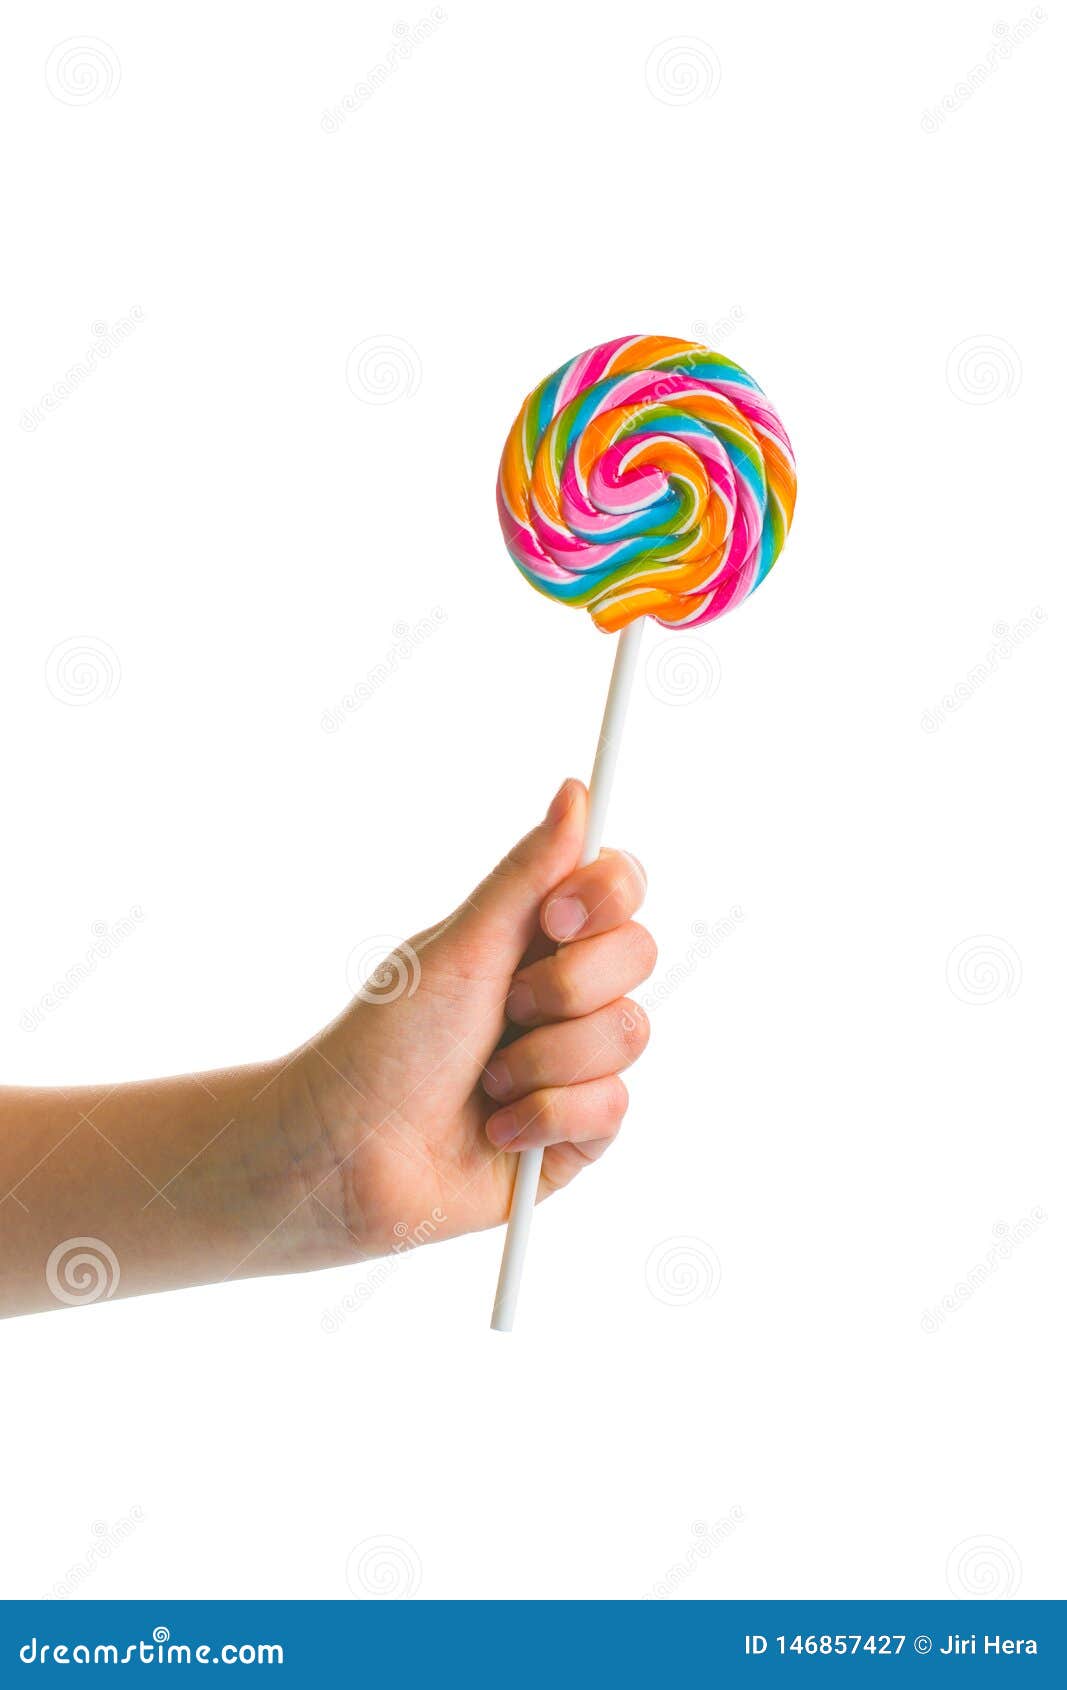 Swirl Colorful Lollipop In Child Hand Stock Image - Image of candy ...